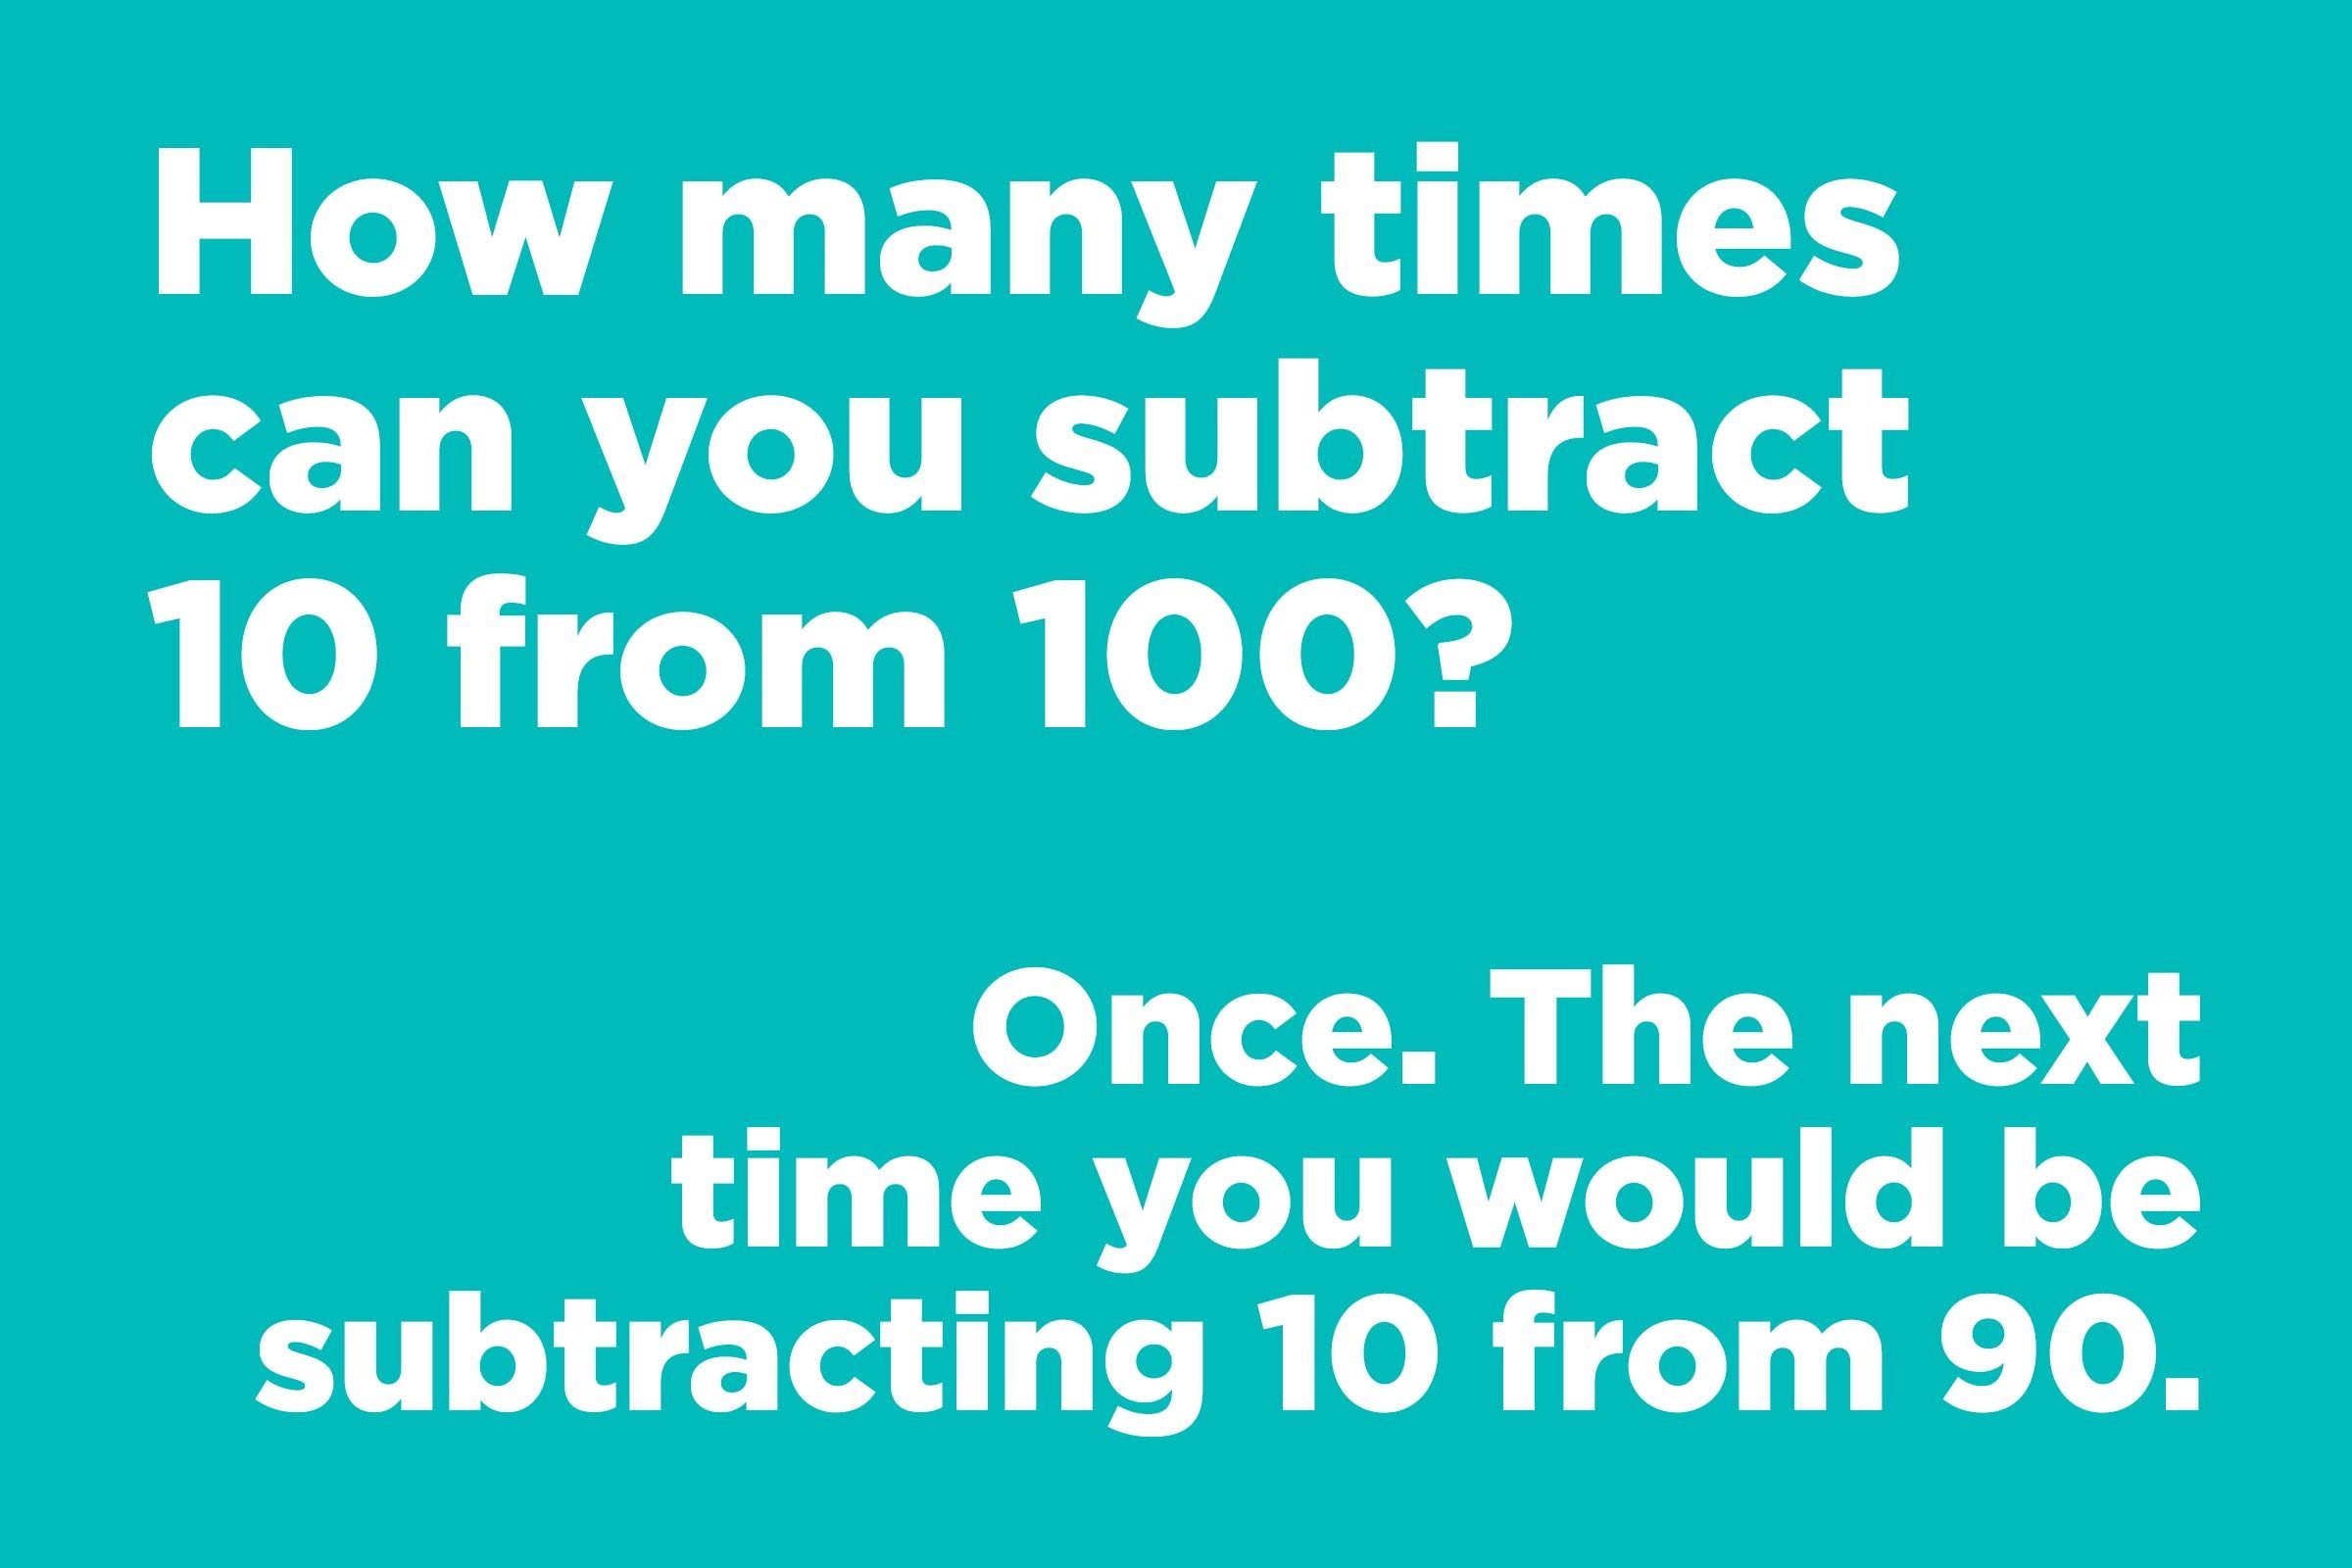 jokes to make anyone laugh - how many times can you subtract 10 from 100? Math joke